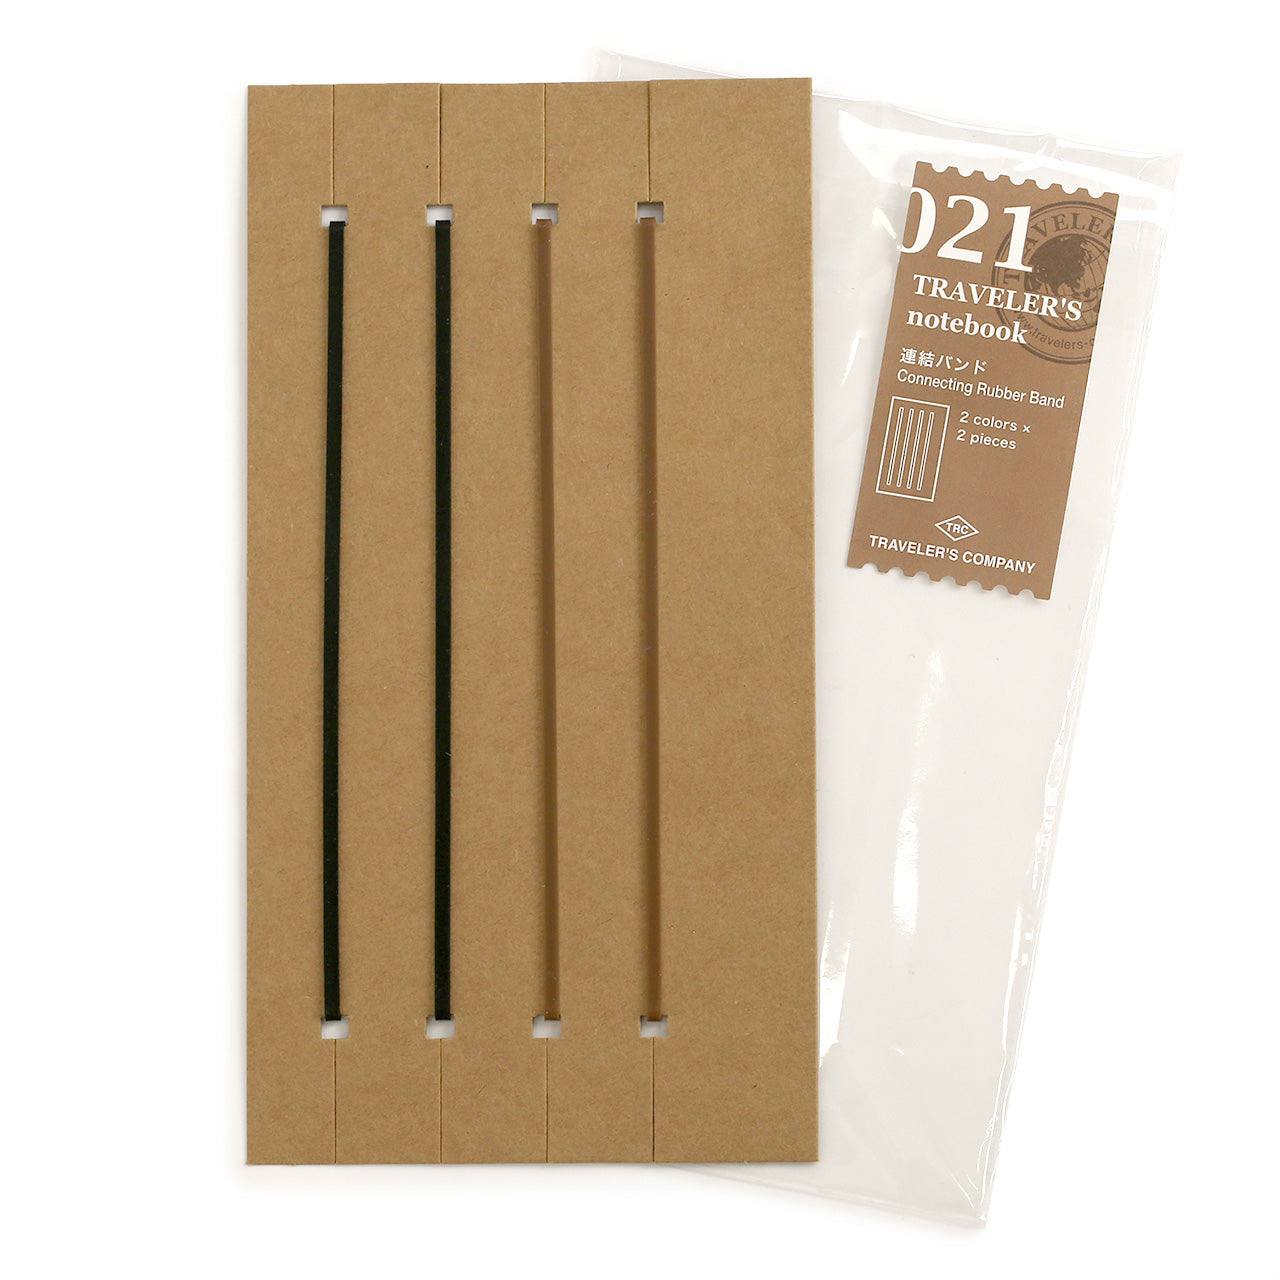 021 Connecting rubber bands for connecting refills in regular sized notebooks. Shows 2 black and 2 brown on a heavy card